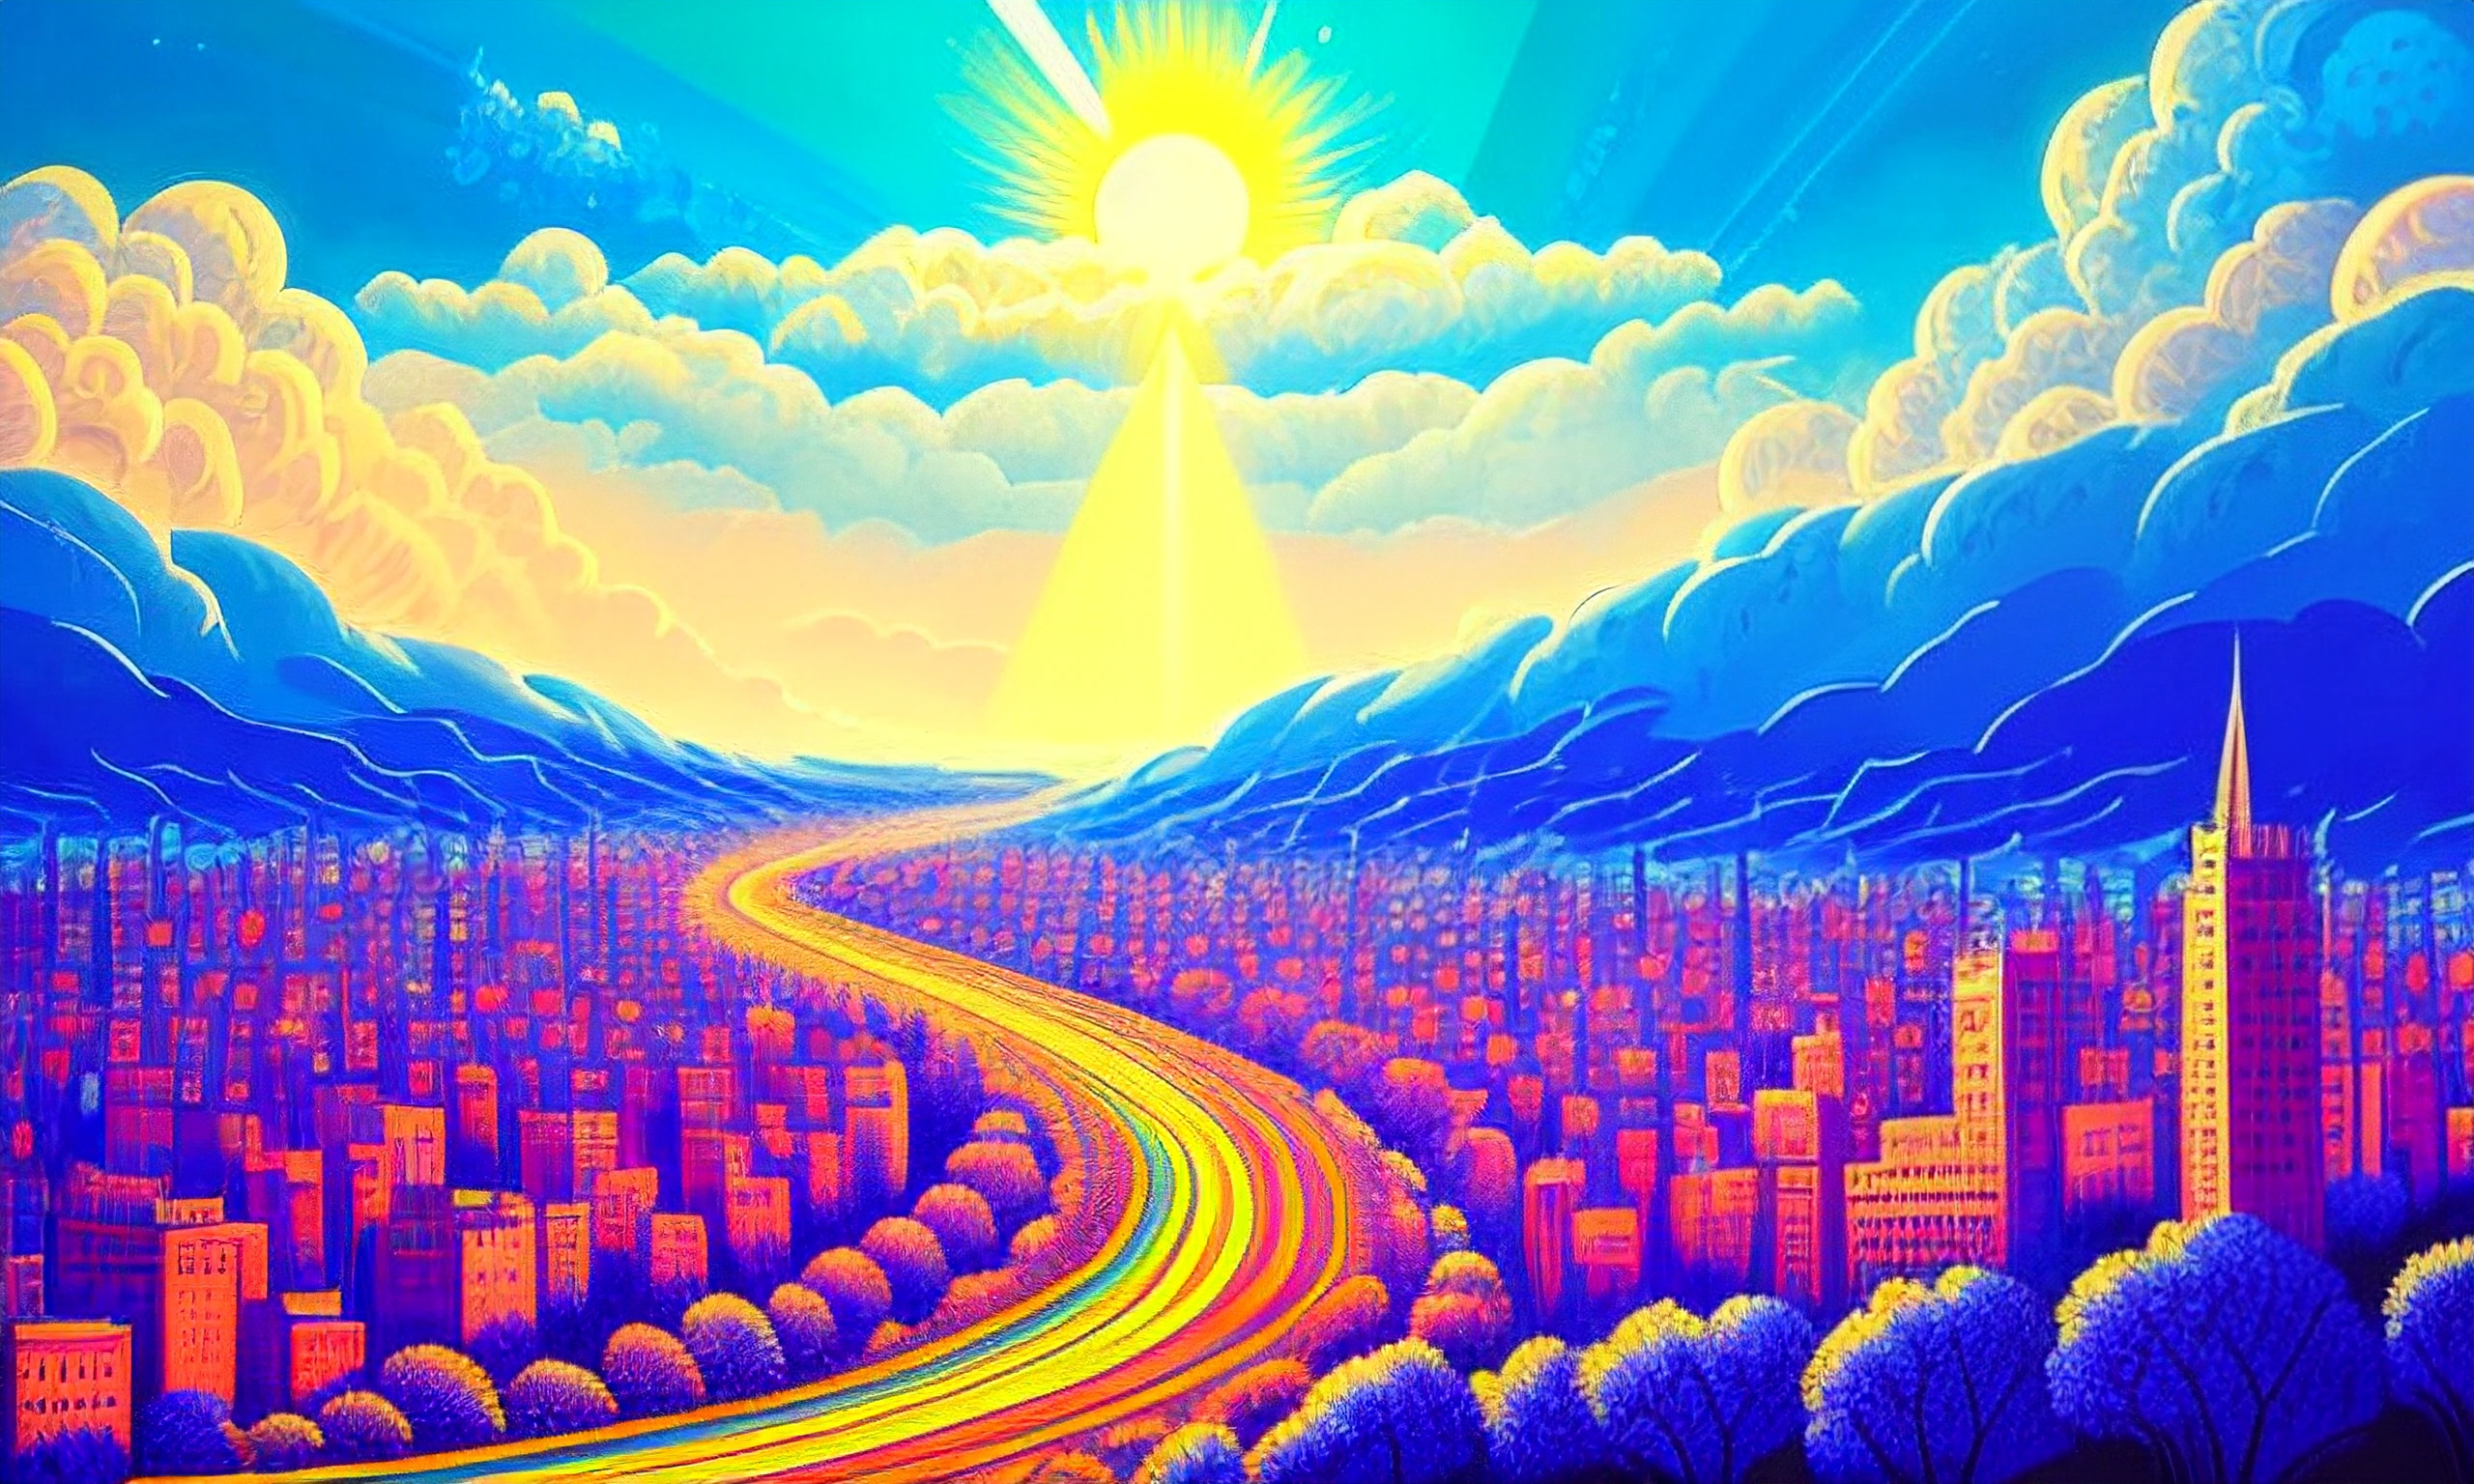 a painting of a city with a rainbow colored road going through it